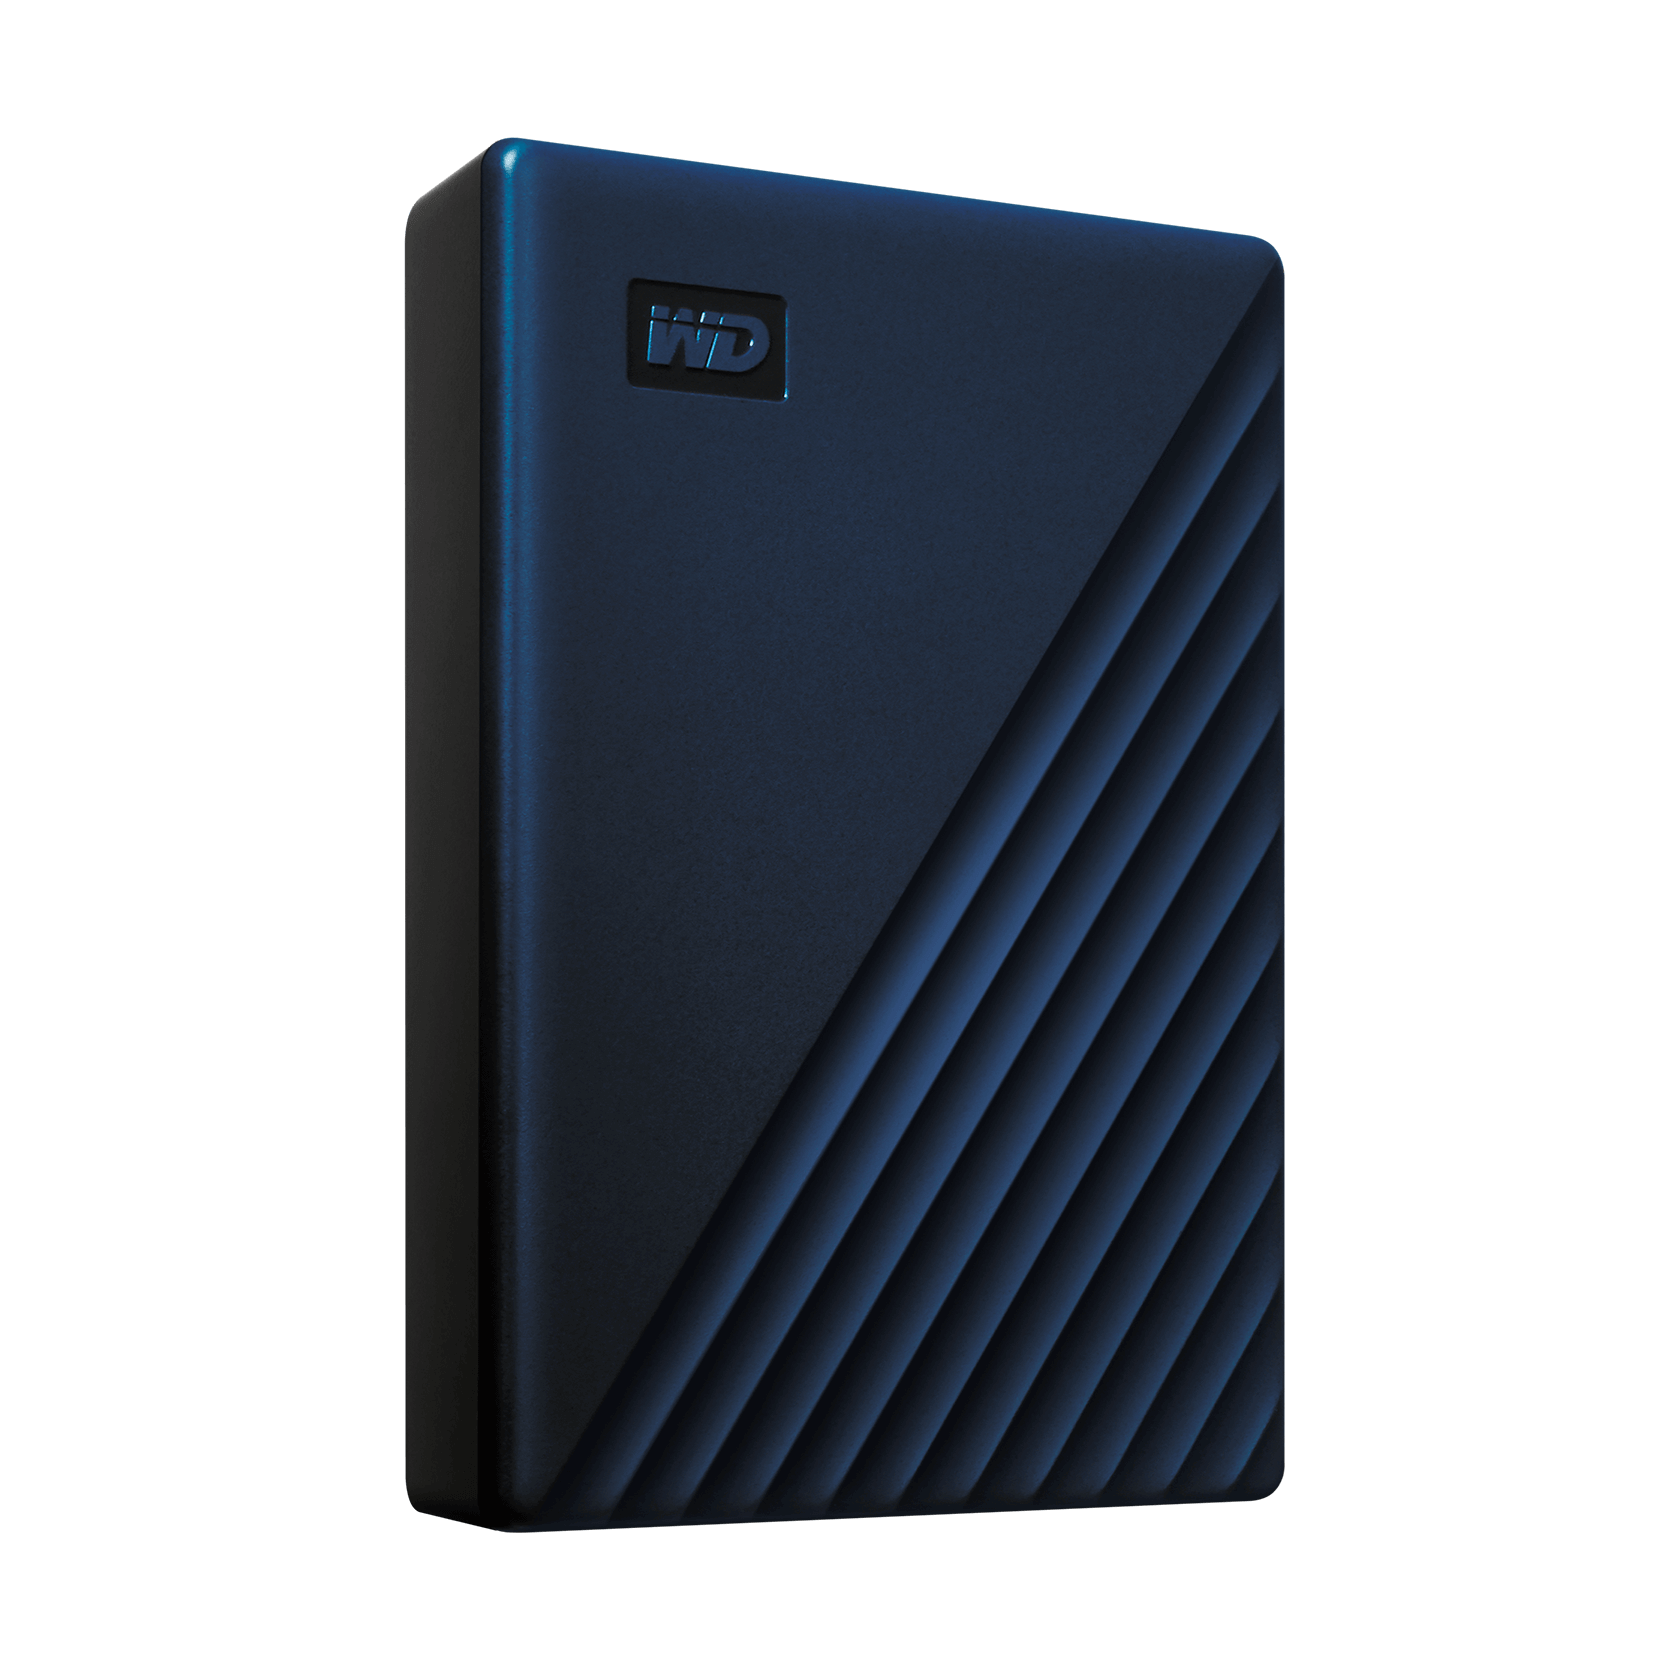 WD 4TB My Passport for Mac, Portable External Hard Drive, Blue - WDBA2F0040BBL-WESN - image 3 of 8